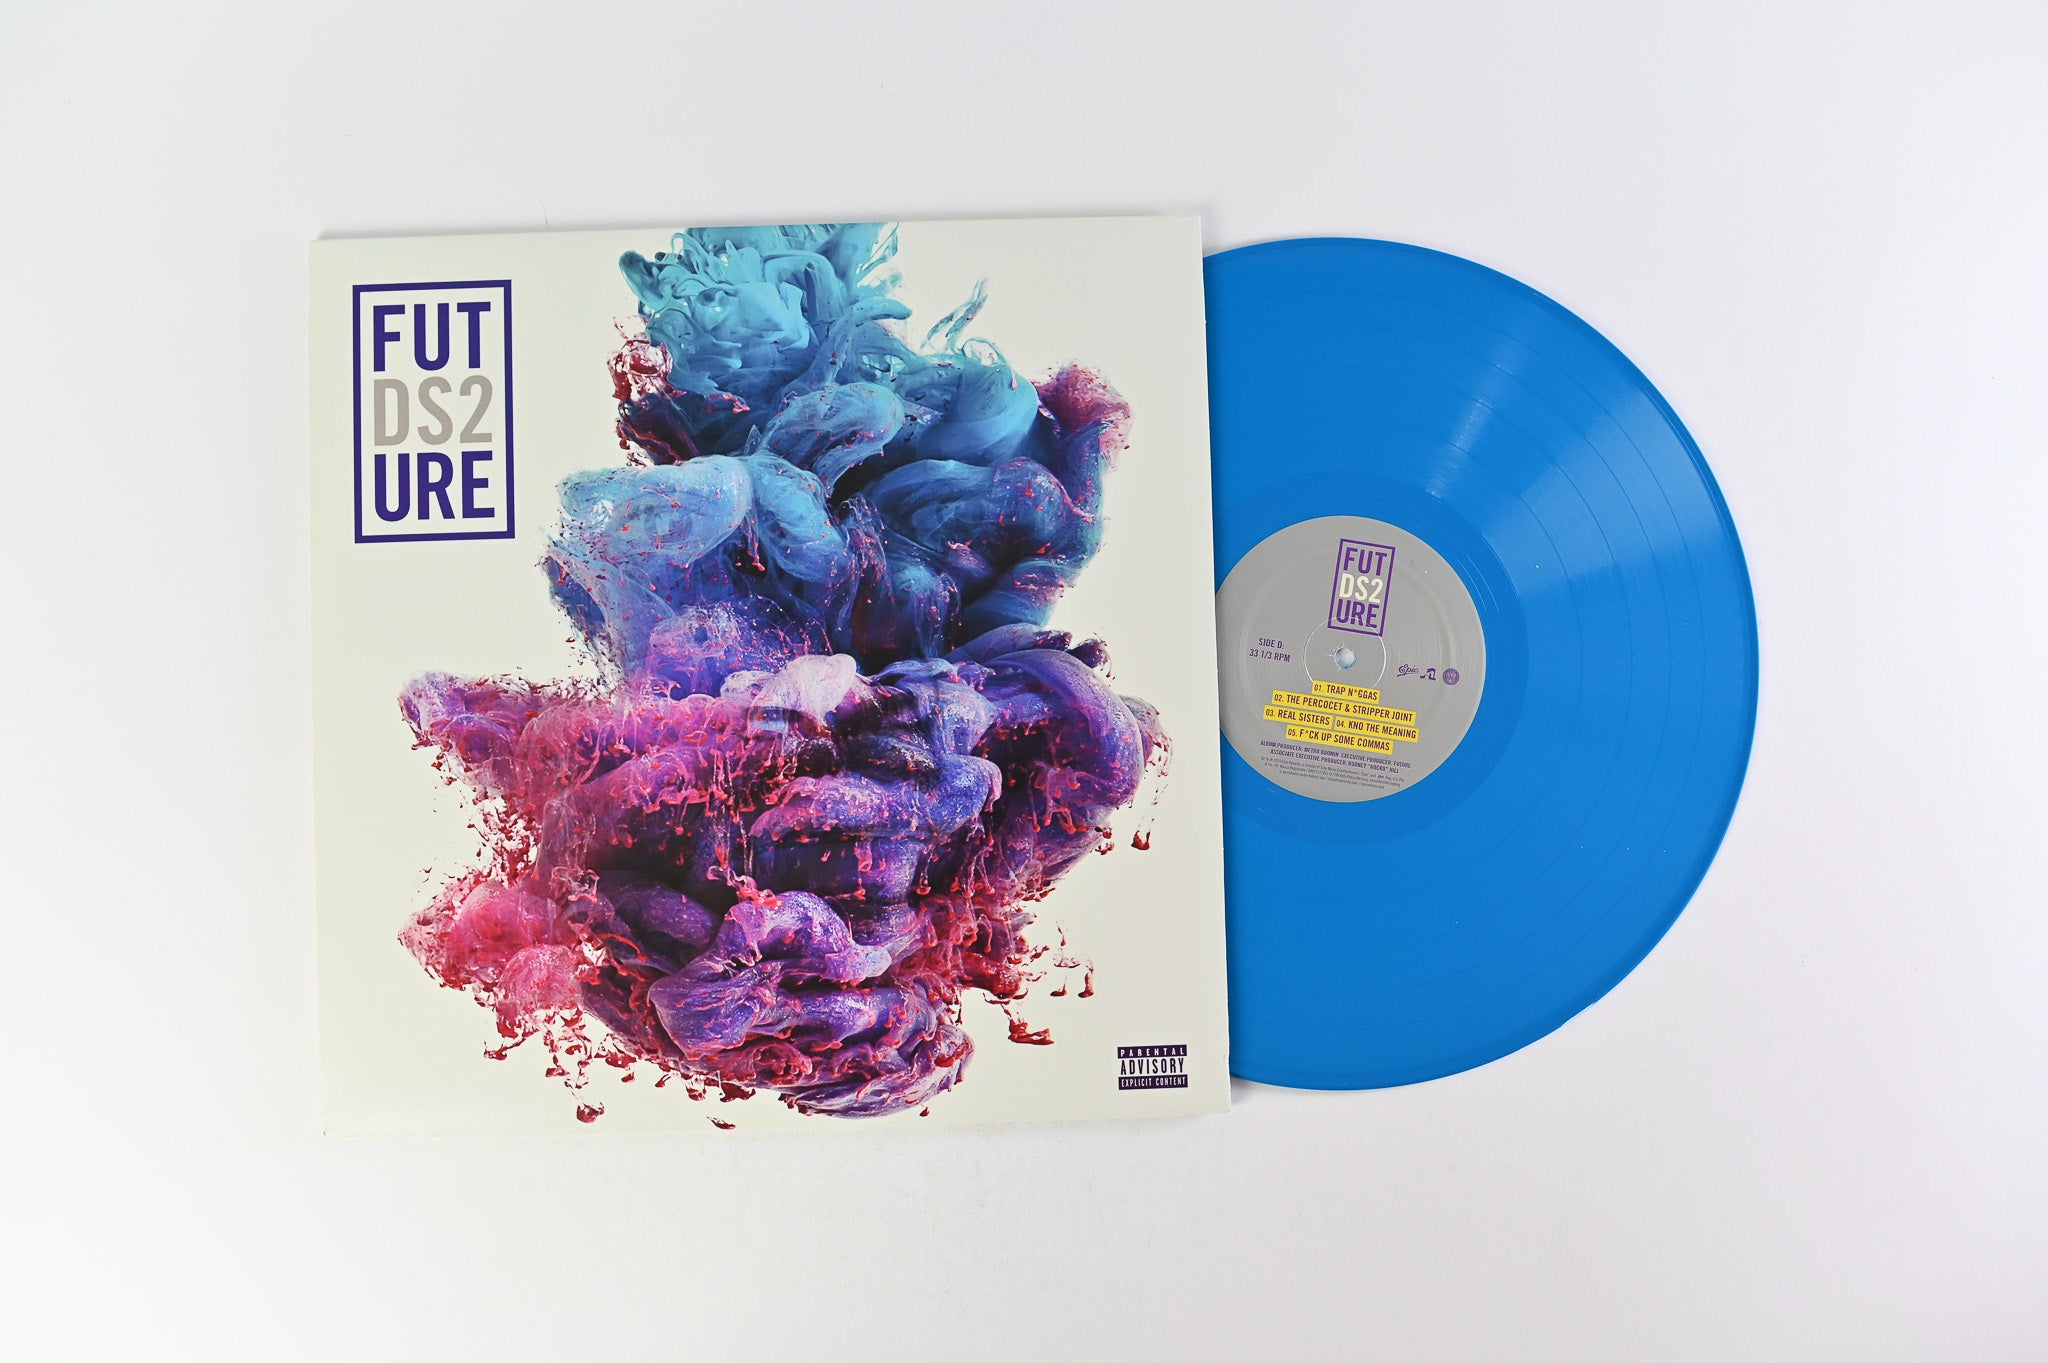 Future - DS2 on Epic RSD Deluxe Edition Reissue Teal